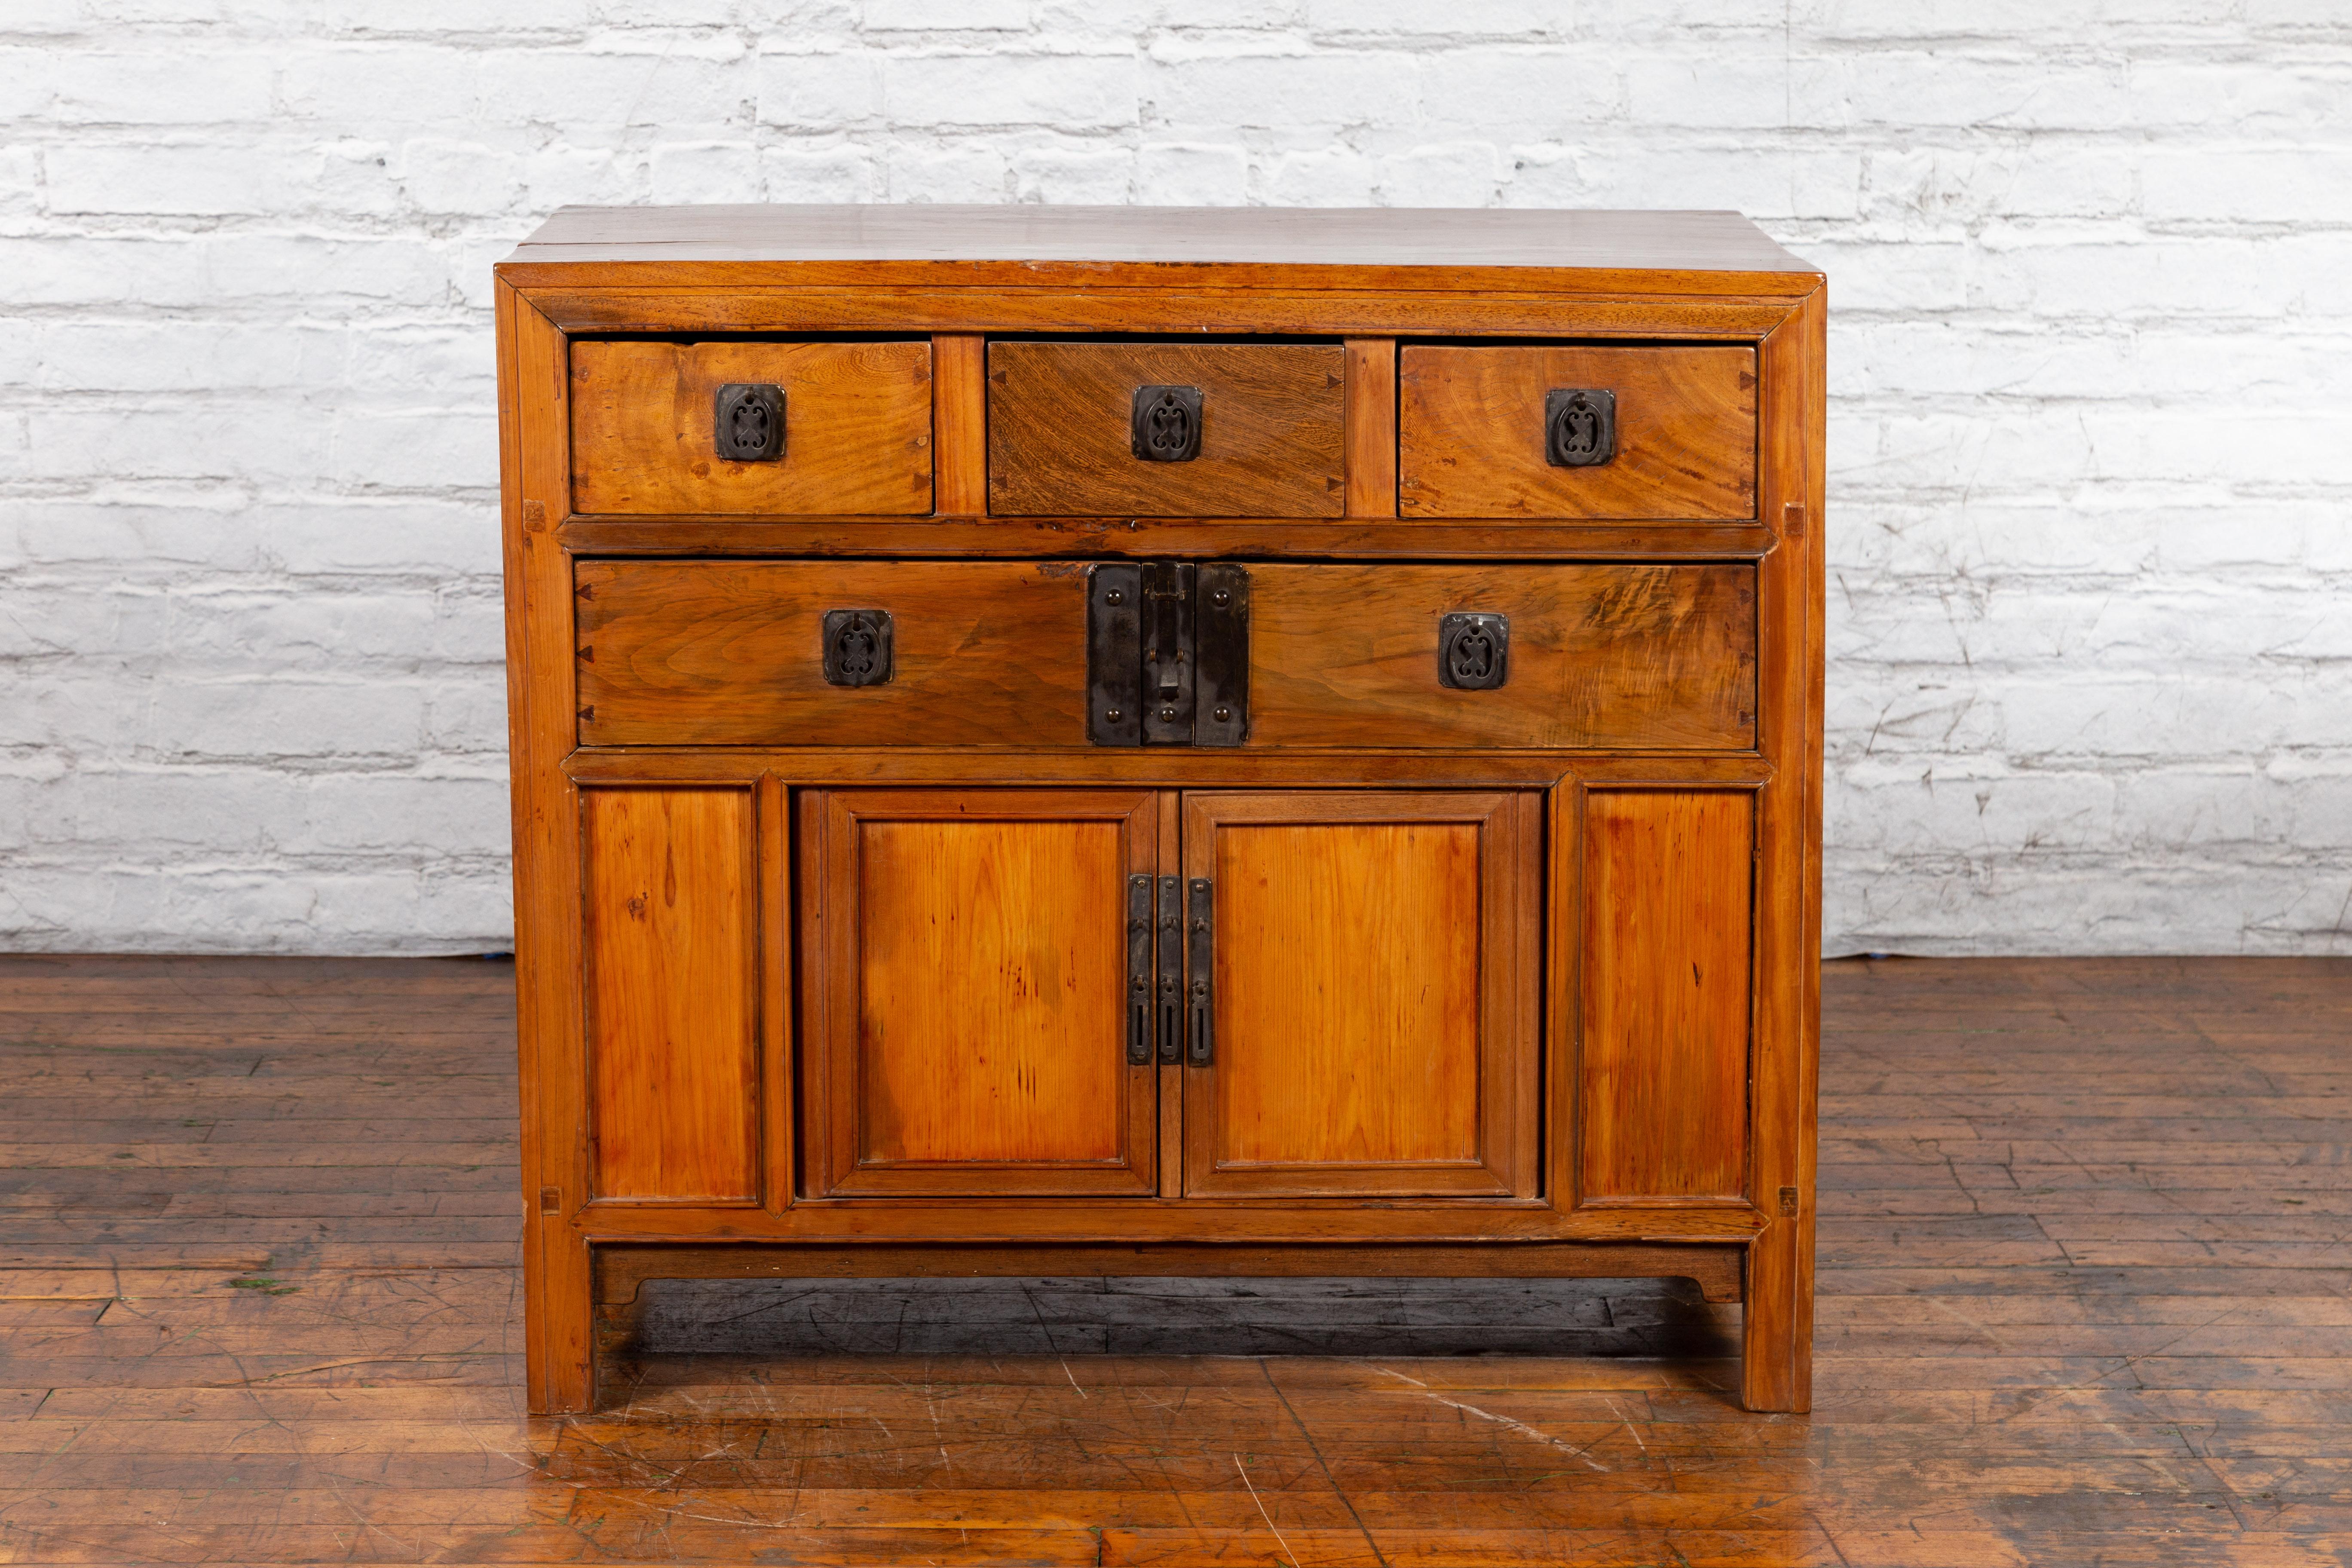 A Chinese Late Qing Dynasty period elmwood cabinet from the early 20th century with five drawers, two doors and iron hardware. Created in China during the late Qing Dynasty in the early years of the 20th century, this elm wood cabinet features a